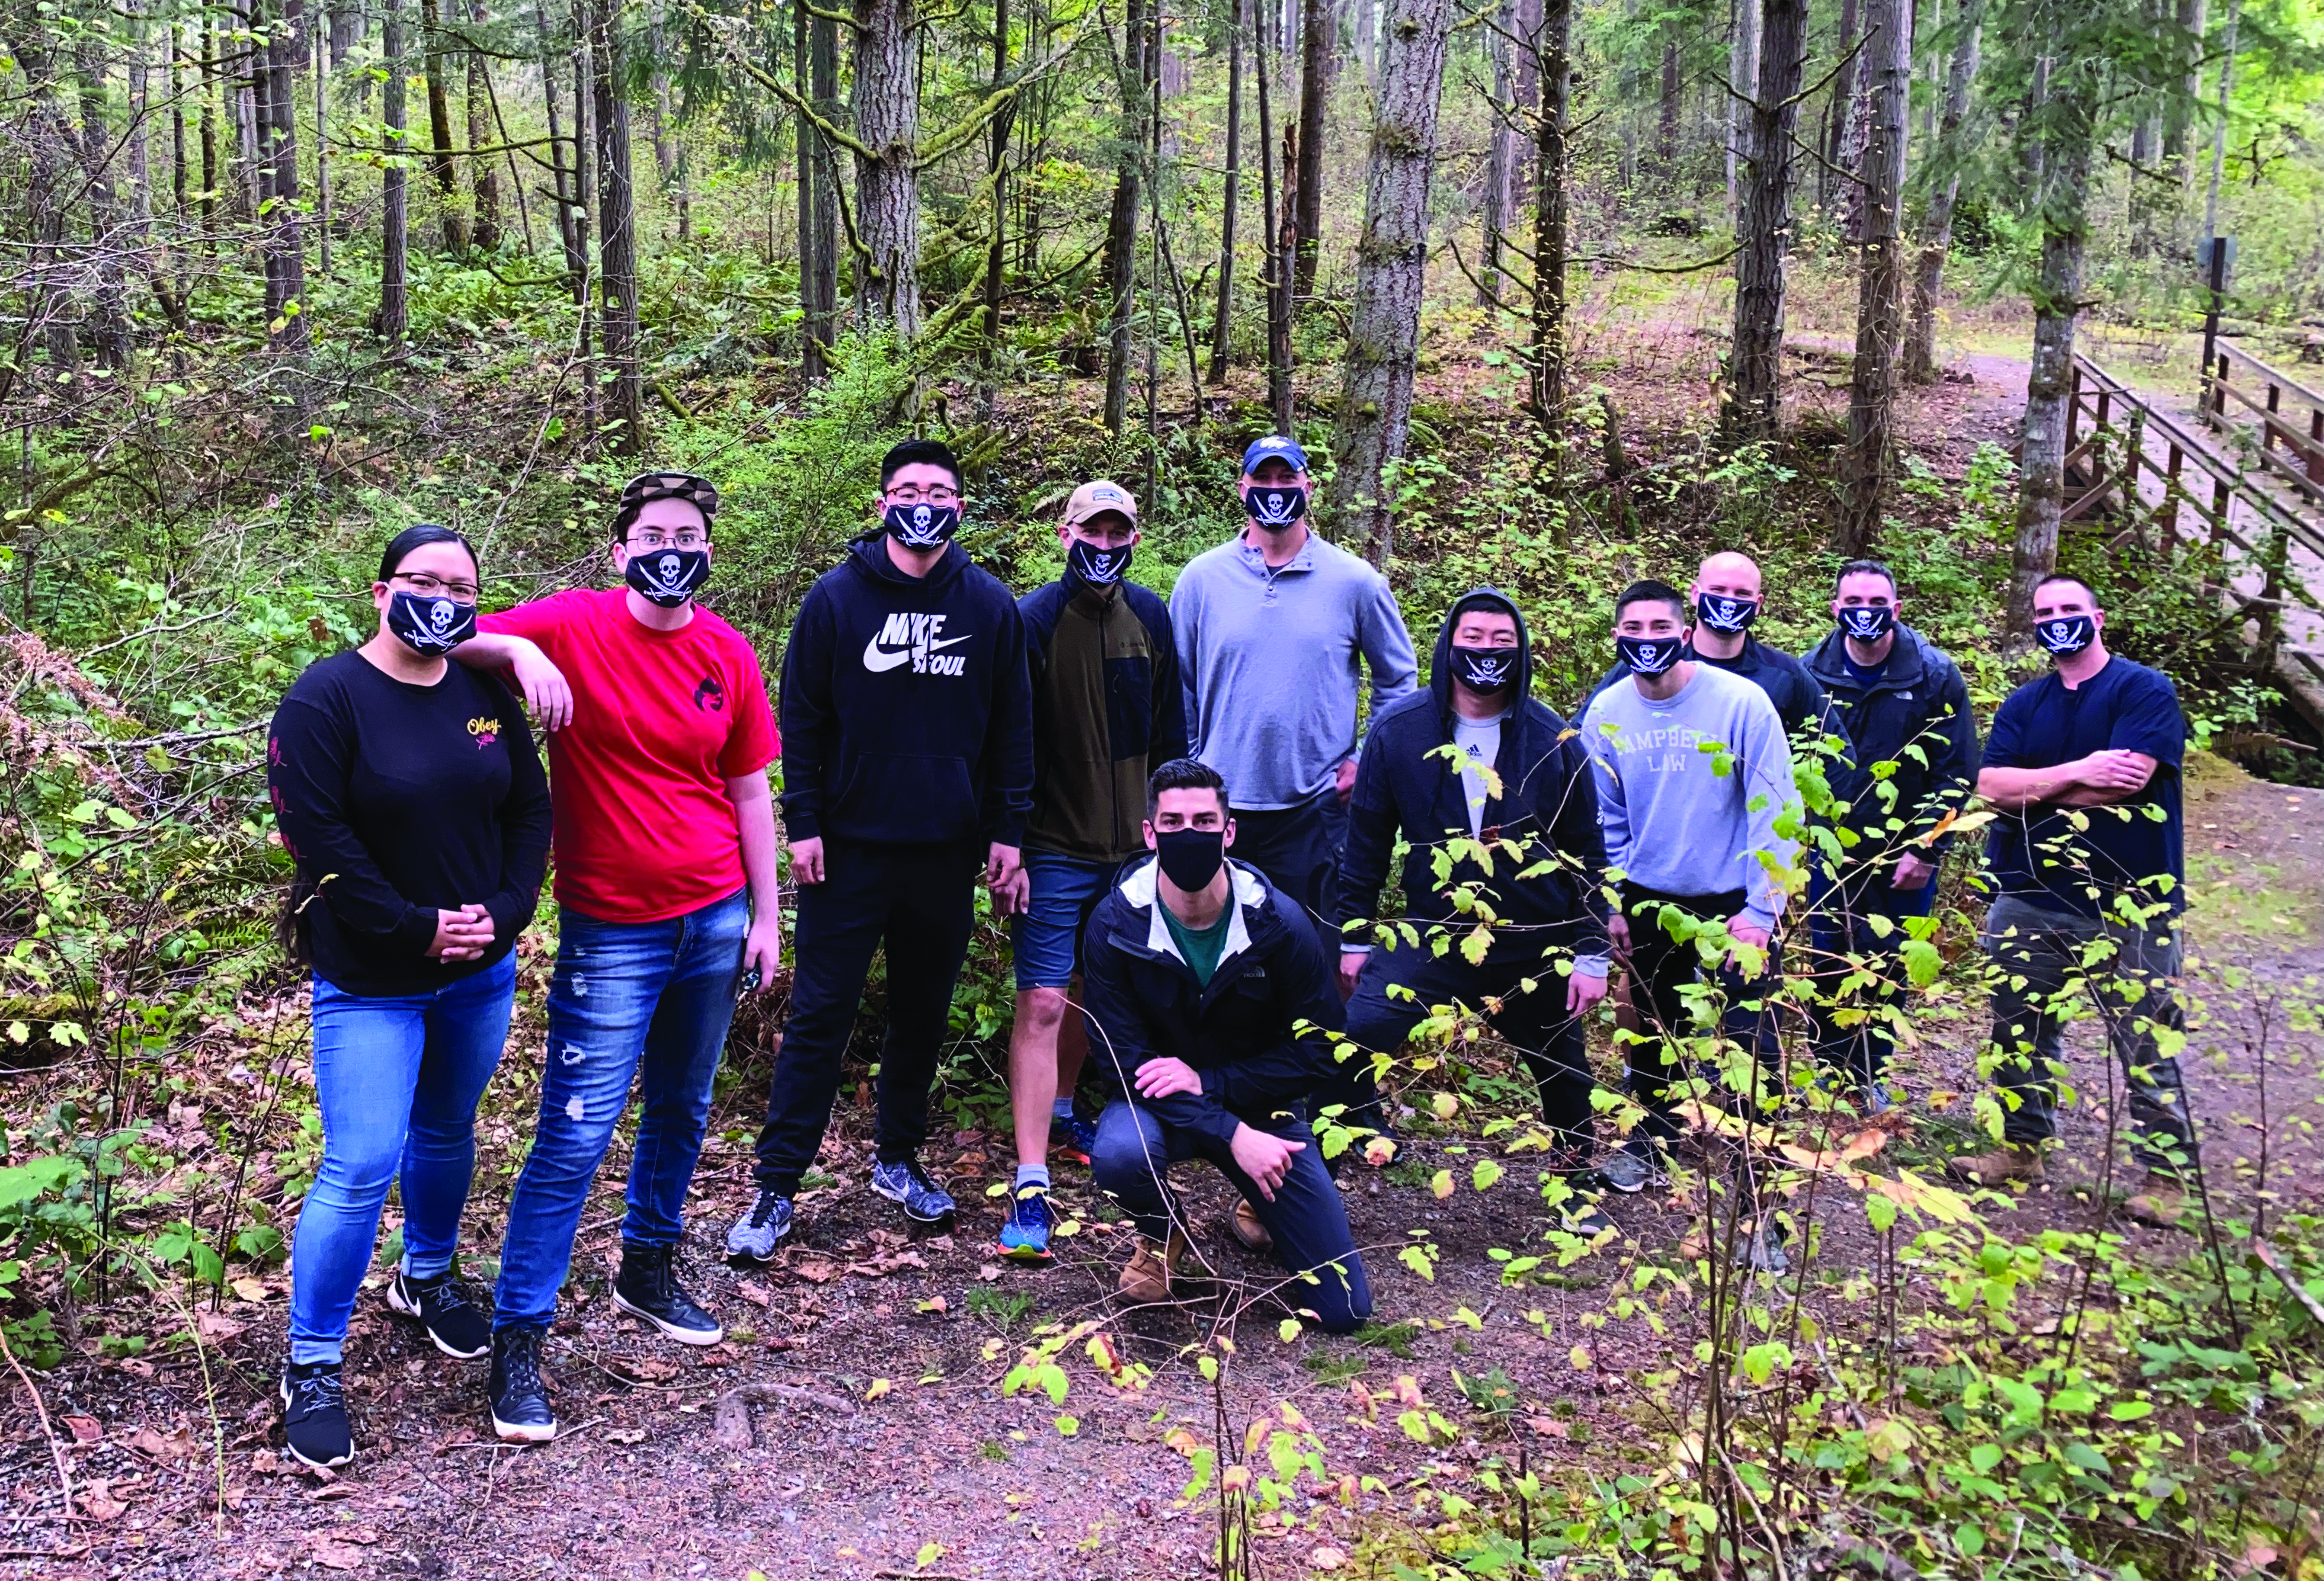 Hardworking JBLM TDS gets in a hike during the monthly TDS Social Day! Top row L to R: SPC La Rosa, SPC Clarno, CPT Baek, CPT Bowyer, Mr. Parker. Bottom L to R: CPT Harnish, CPT Kim, CPT Hall, CPT Hanzeli, CPT Deel, and SGT Mortimer.